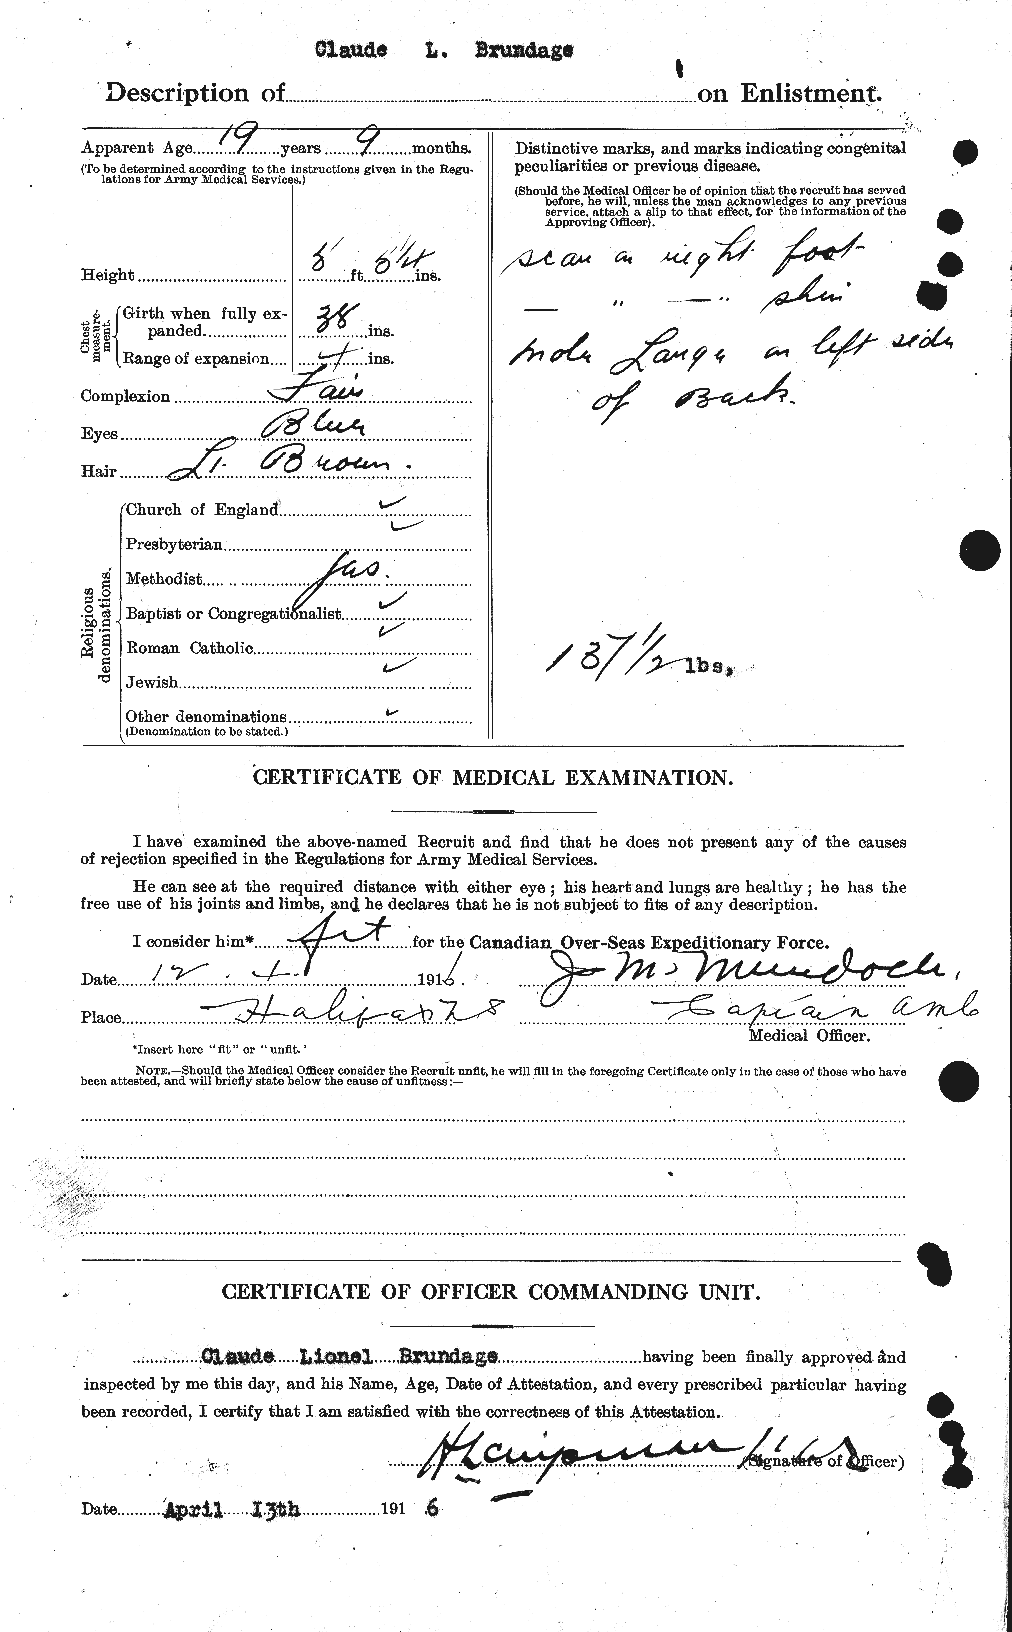 Personnel Records of the First World War - CEF 267937b